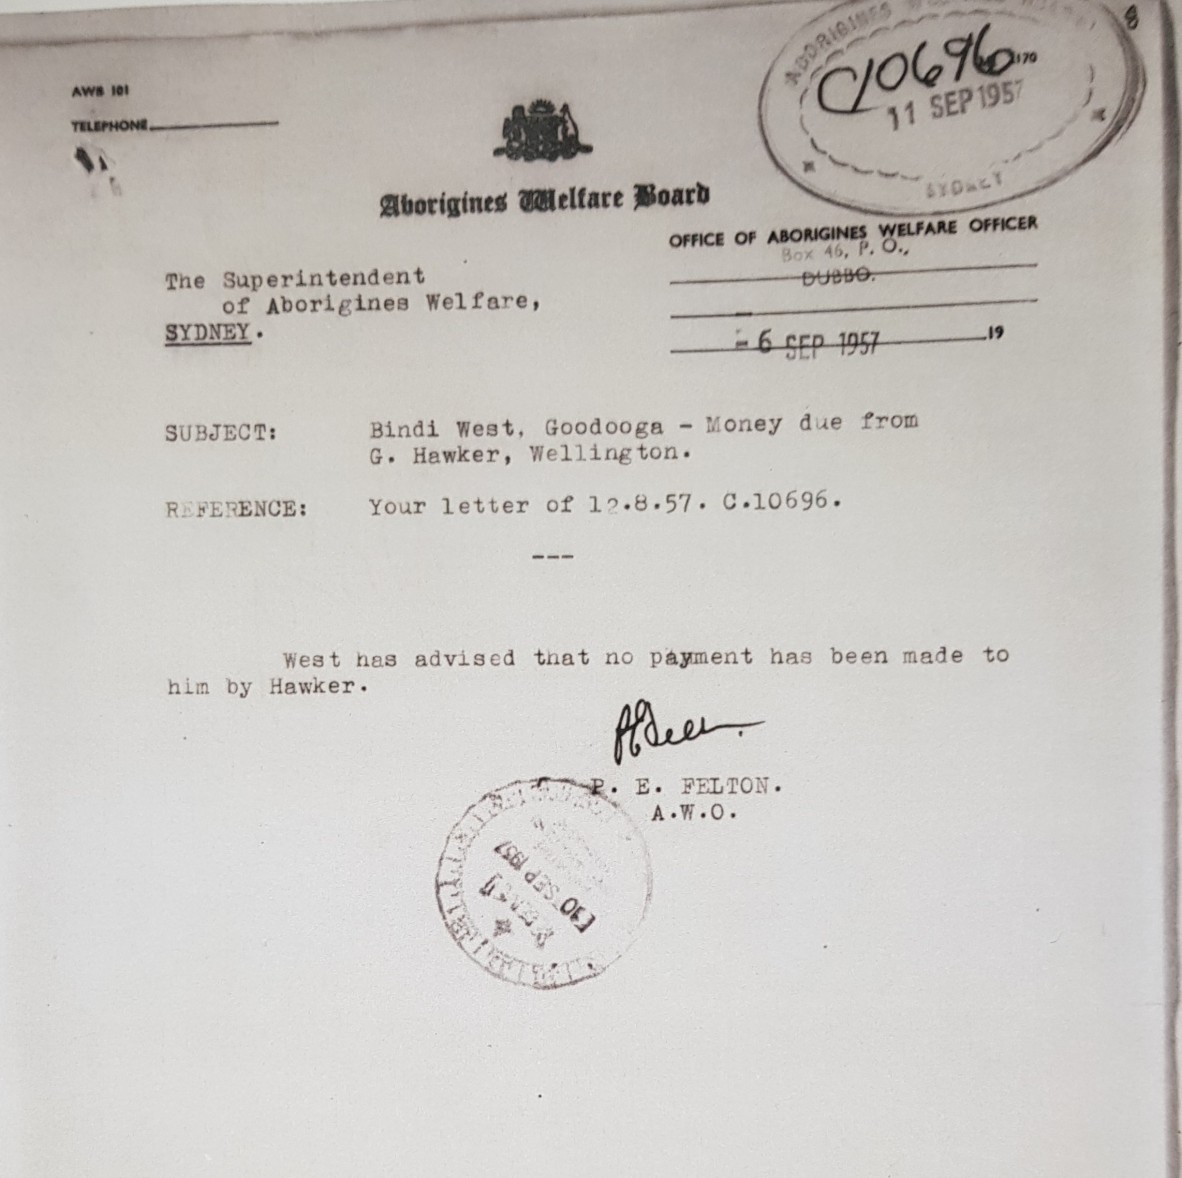 P. E. Felton, the Aborigines Welfare Officer at the Aborigines Welfare Board in Dubbo writes back to  M. H. Saxby, the Superintendent of Aborigines Welfare, Sydney, over a month later on 16th September 1957, to inform Saxby that no, Bindi West has not yet been paid the additional money owed to him for the droving contract completed in October 1956.